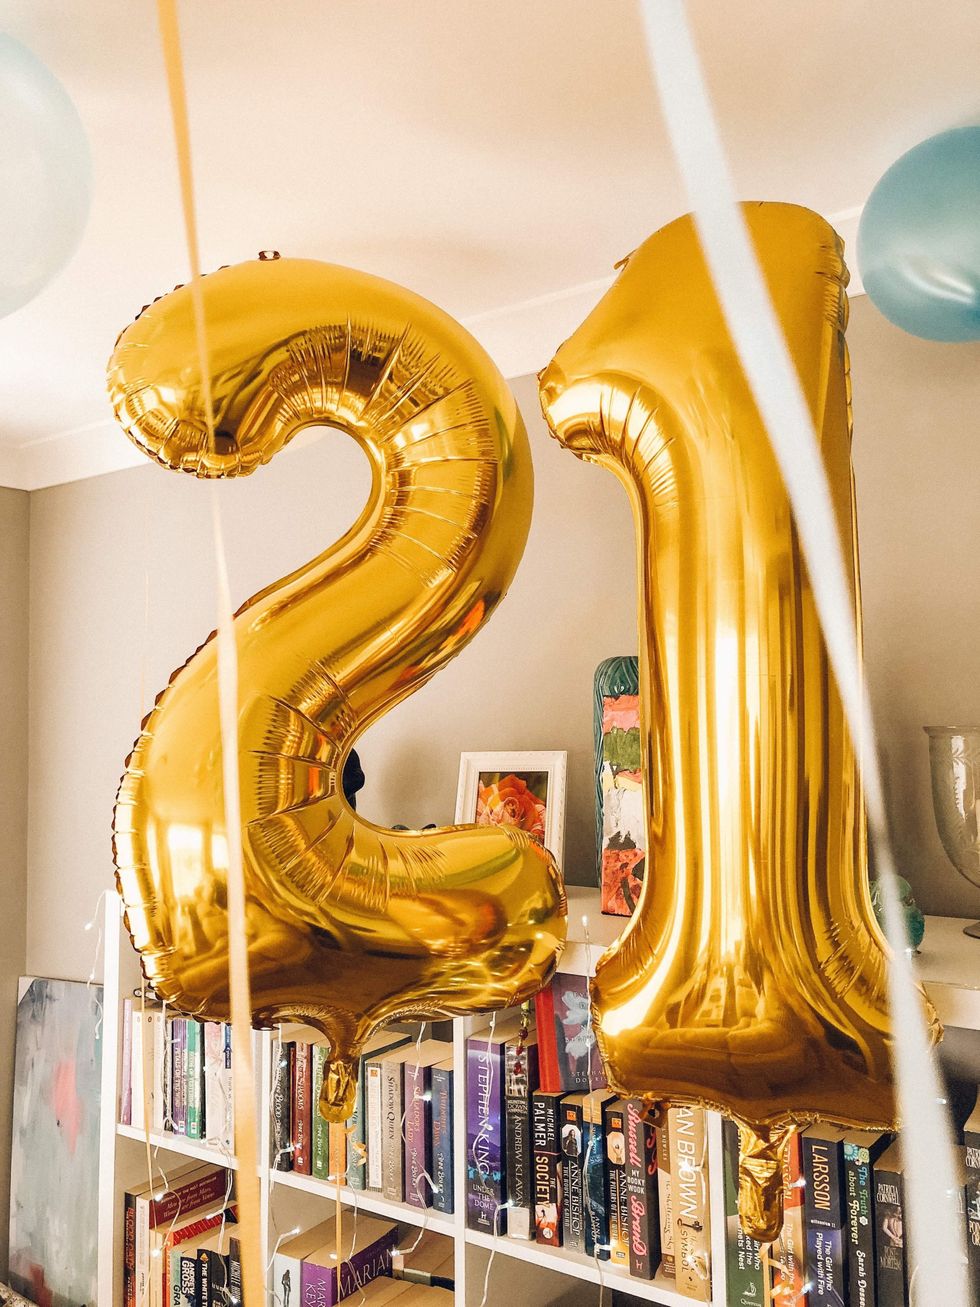 21 Things I Wish I Knew Before I Turned 21, But I Know I Won't Forget